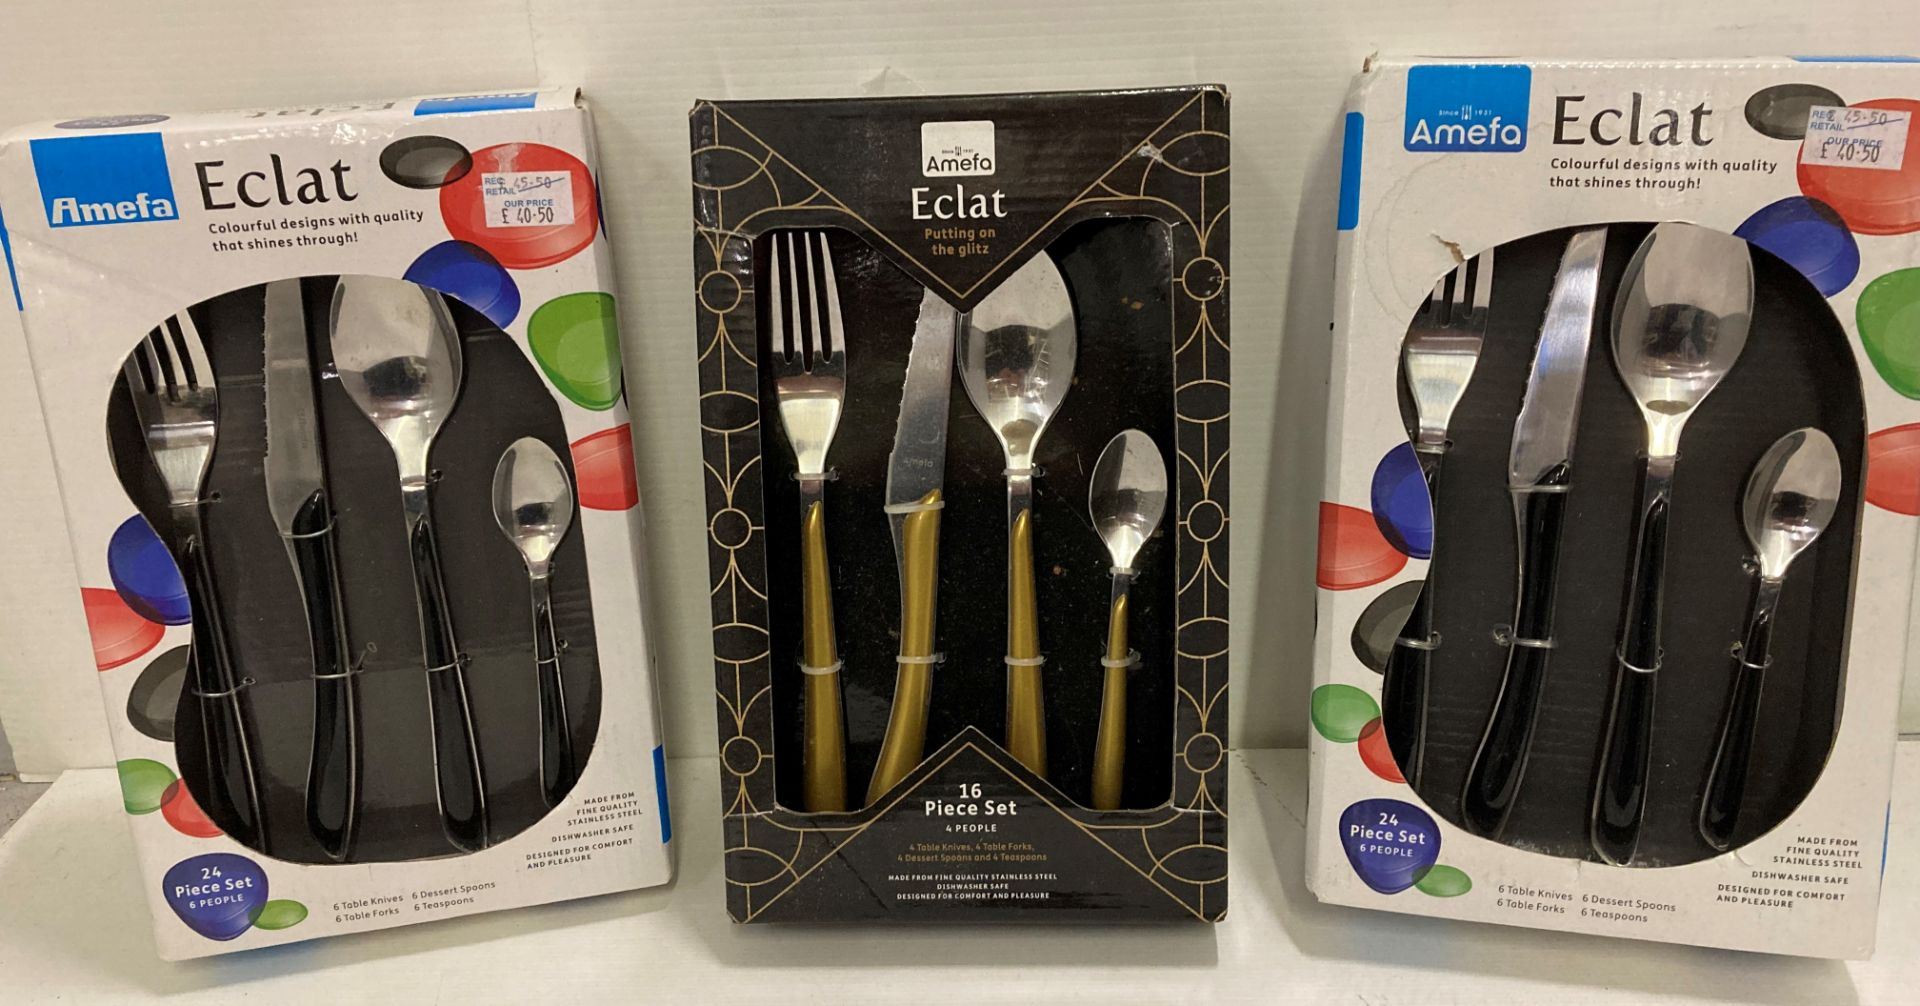 2 x 24 piece Eclat cutlery sets and 1 x 16 piece set (3 sets in total) (V11)